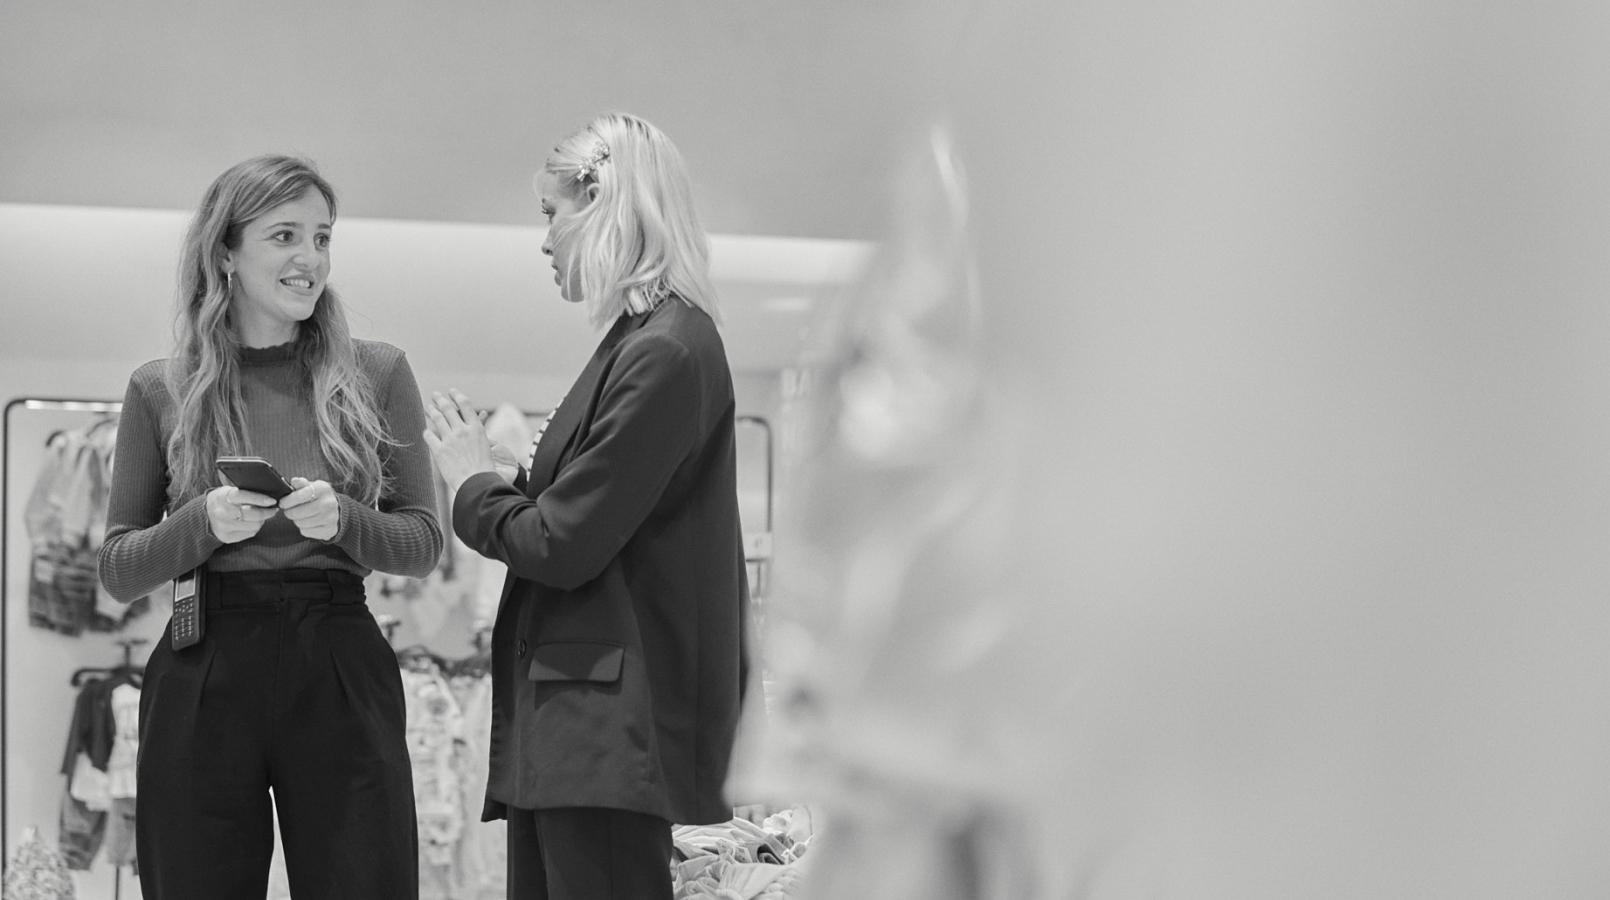 2 workers of Inditex talking in a store. Black and white image